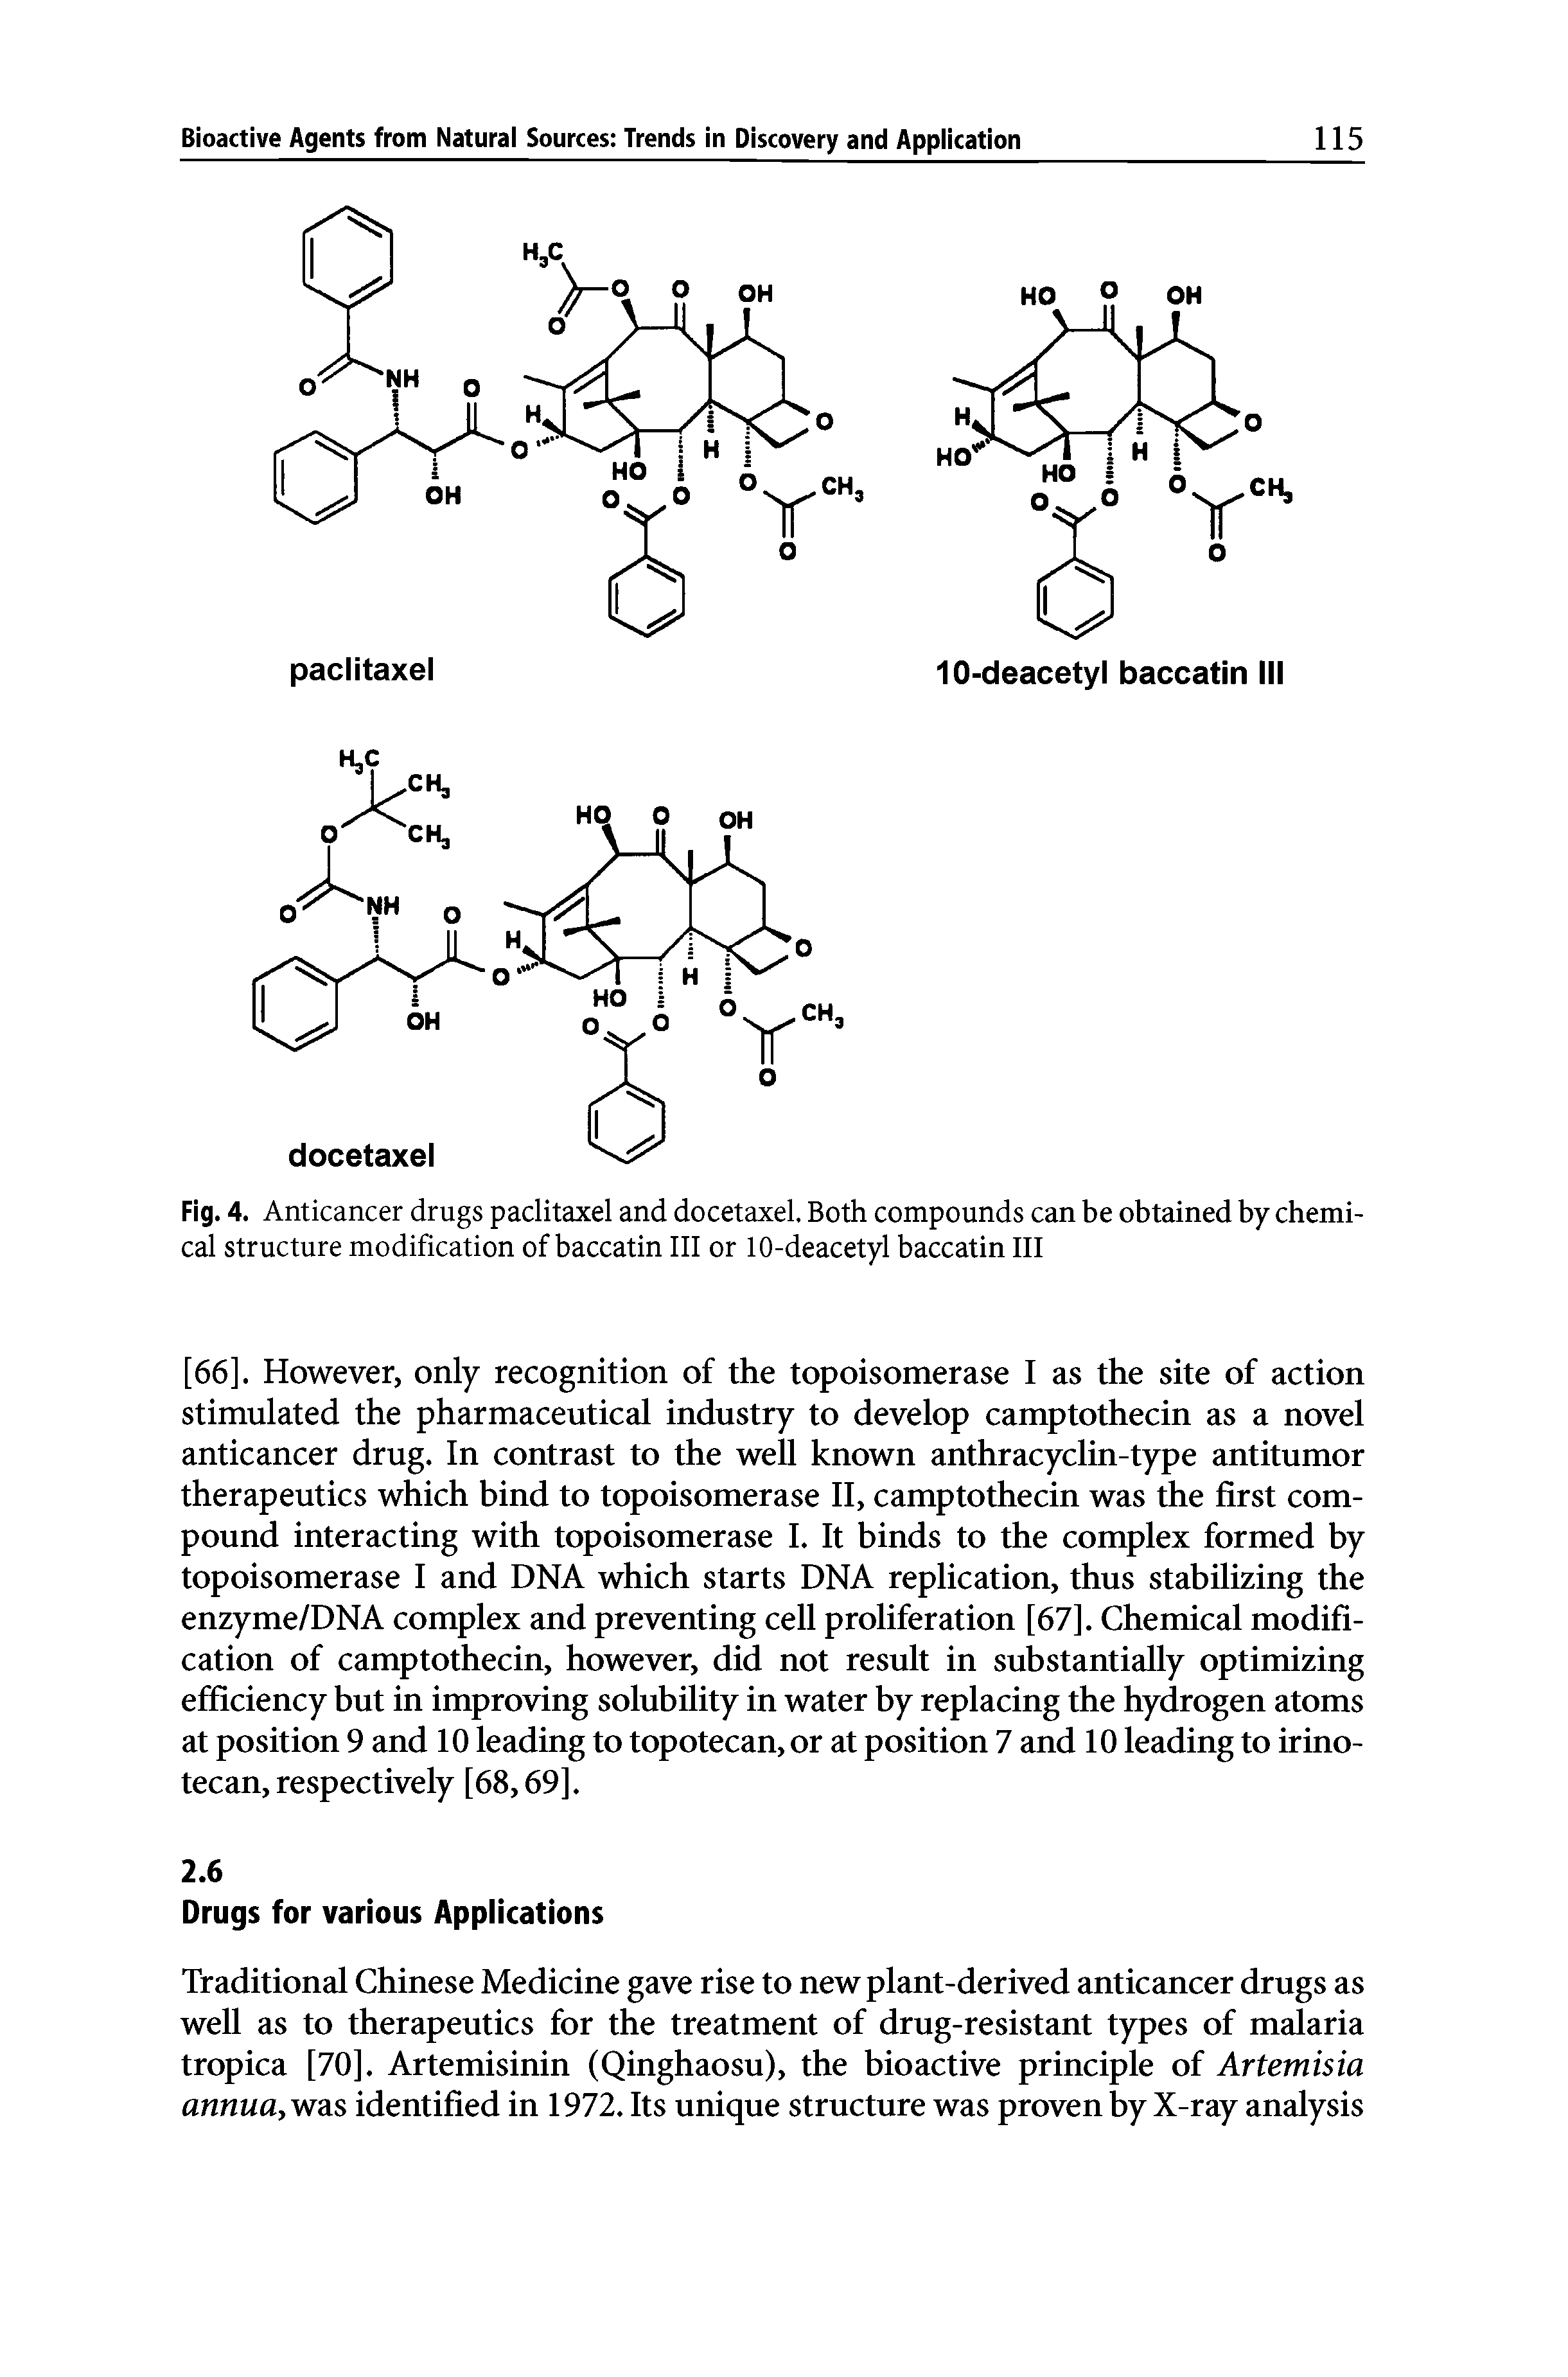 Fig. 4. Anticancer drugs paclitaxel and docetaxel. Both compounds can be obtained by chemical structure modification of baccatin III or 10-deacetyl baccatin III...